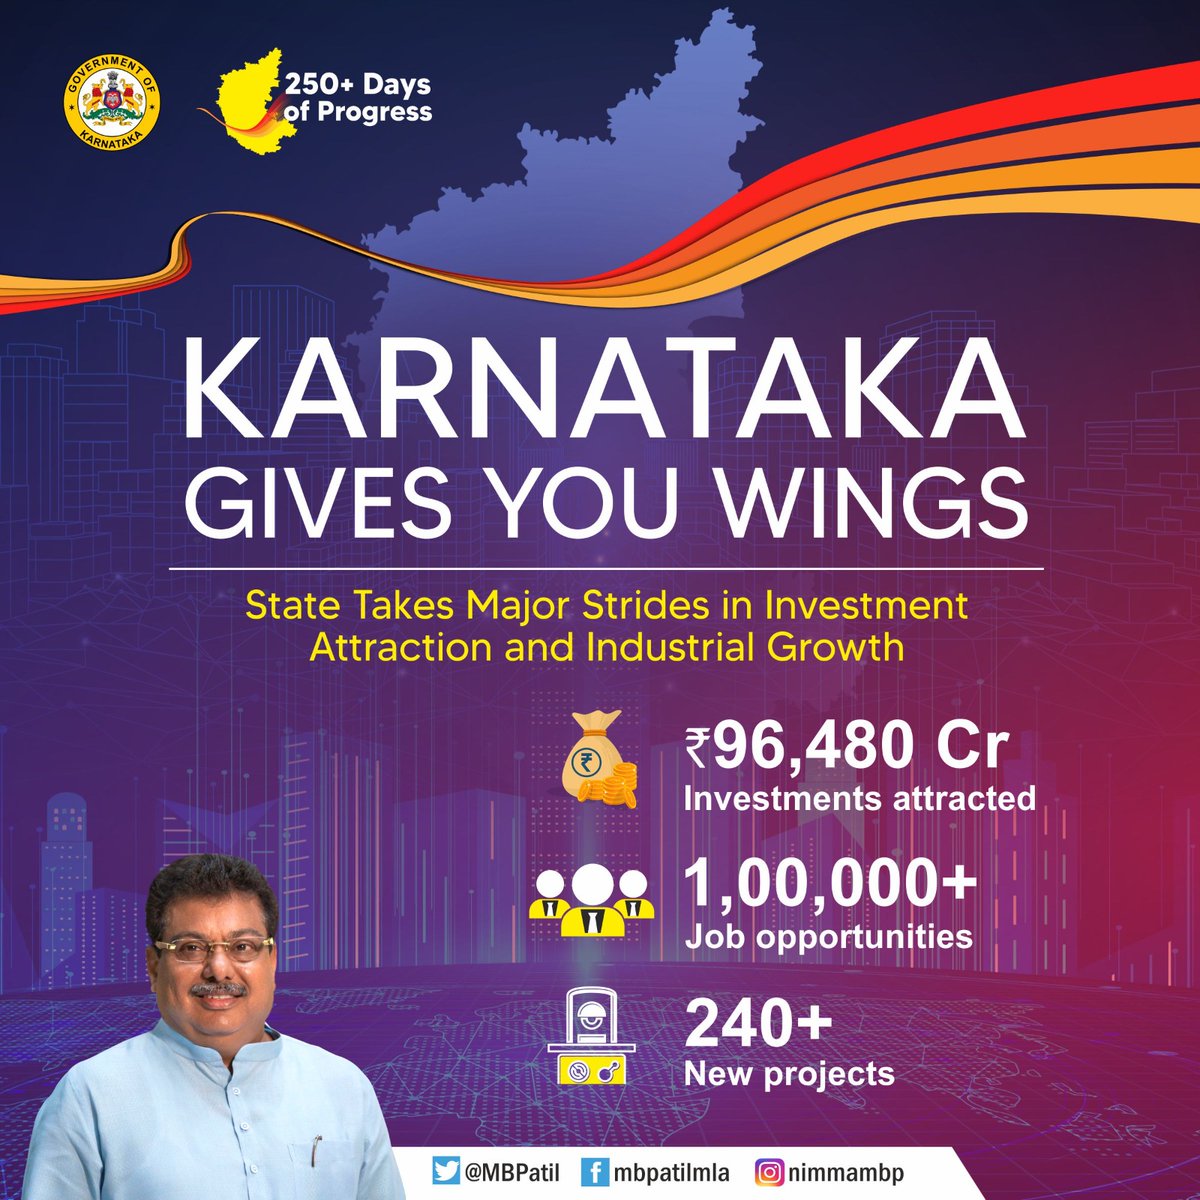 State Takes Major Strides in Investment Attraction and Industrial Growth With an investment exceeding 96,000 crores and the creation of 100,000+ job opportunities, Karnataka is poised for a transformative impact on its economic landscape. #KarnatakaGrowthStory #KarnatakaForIndia…